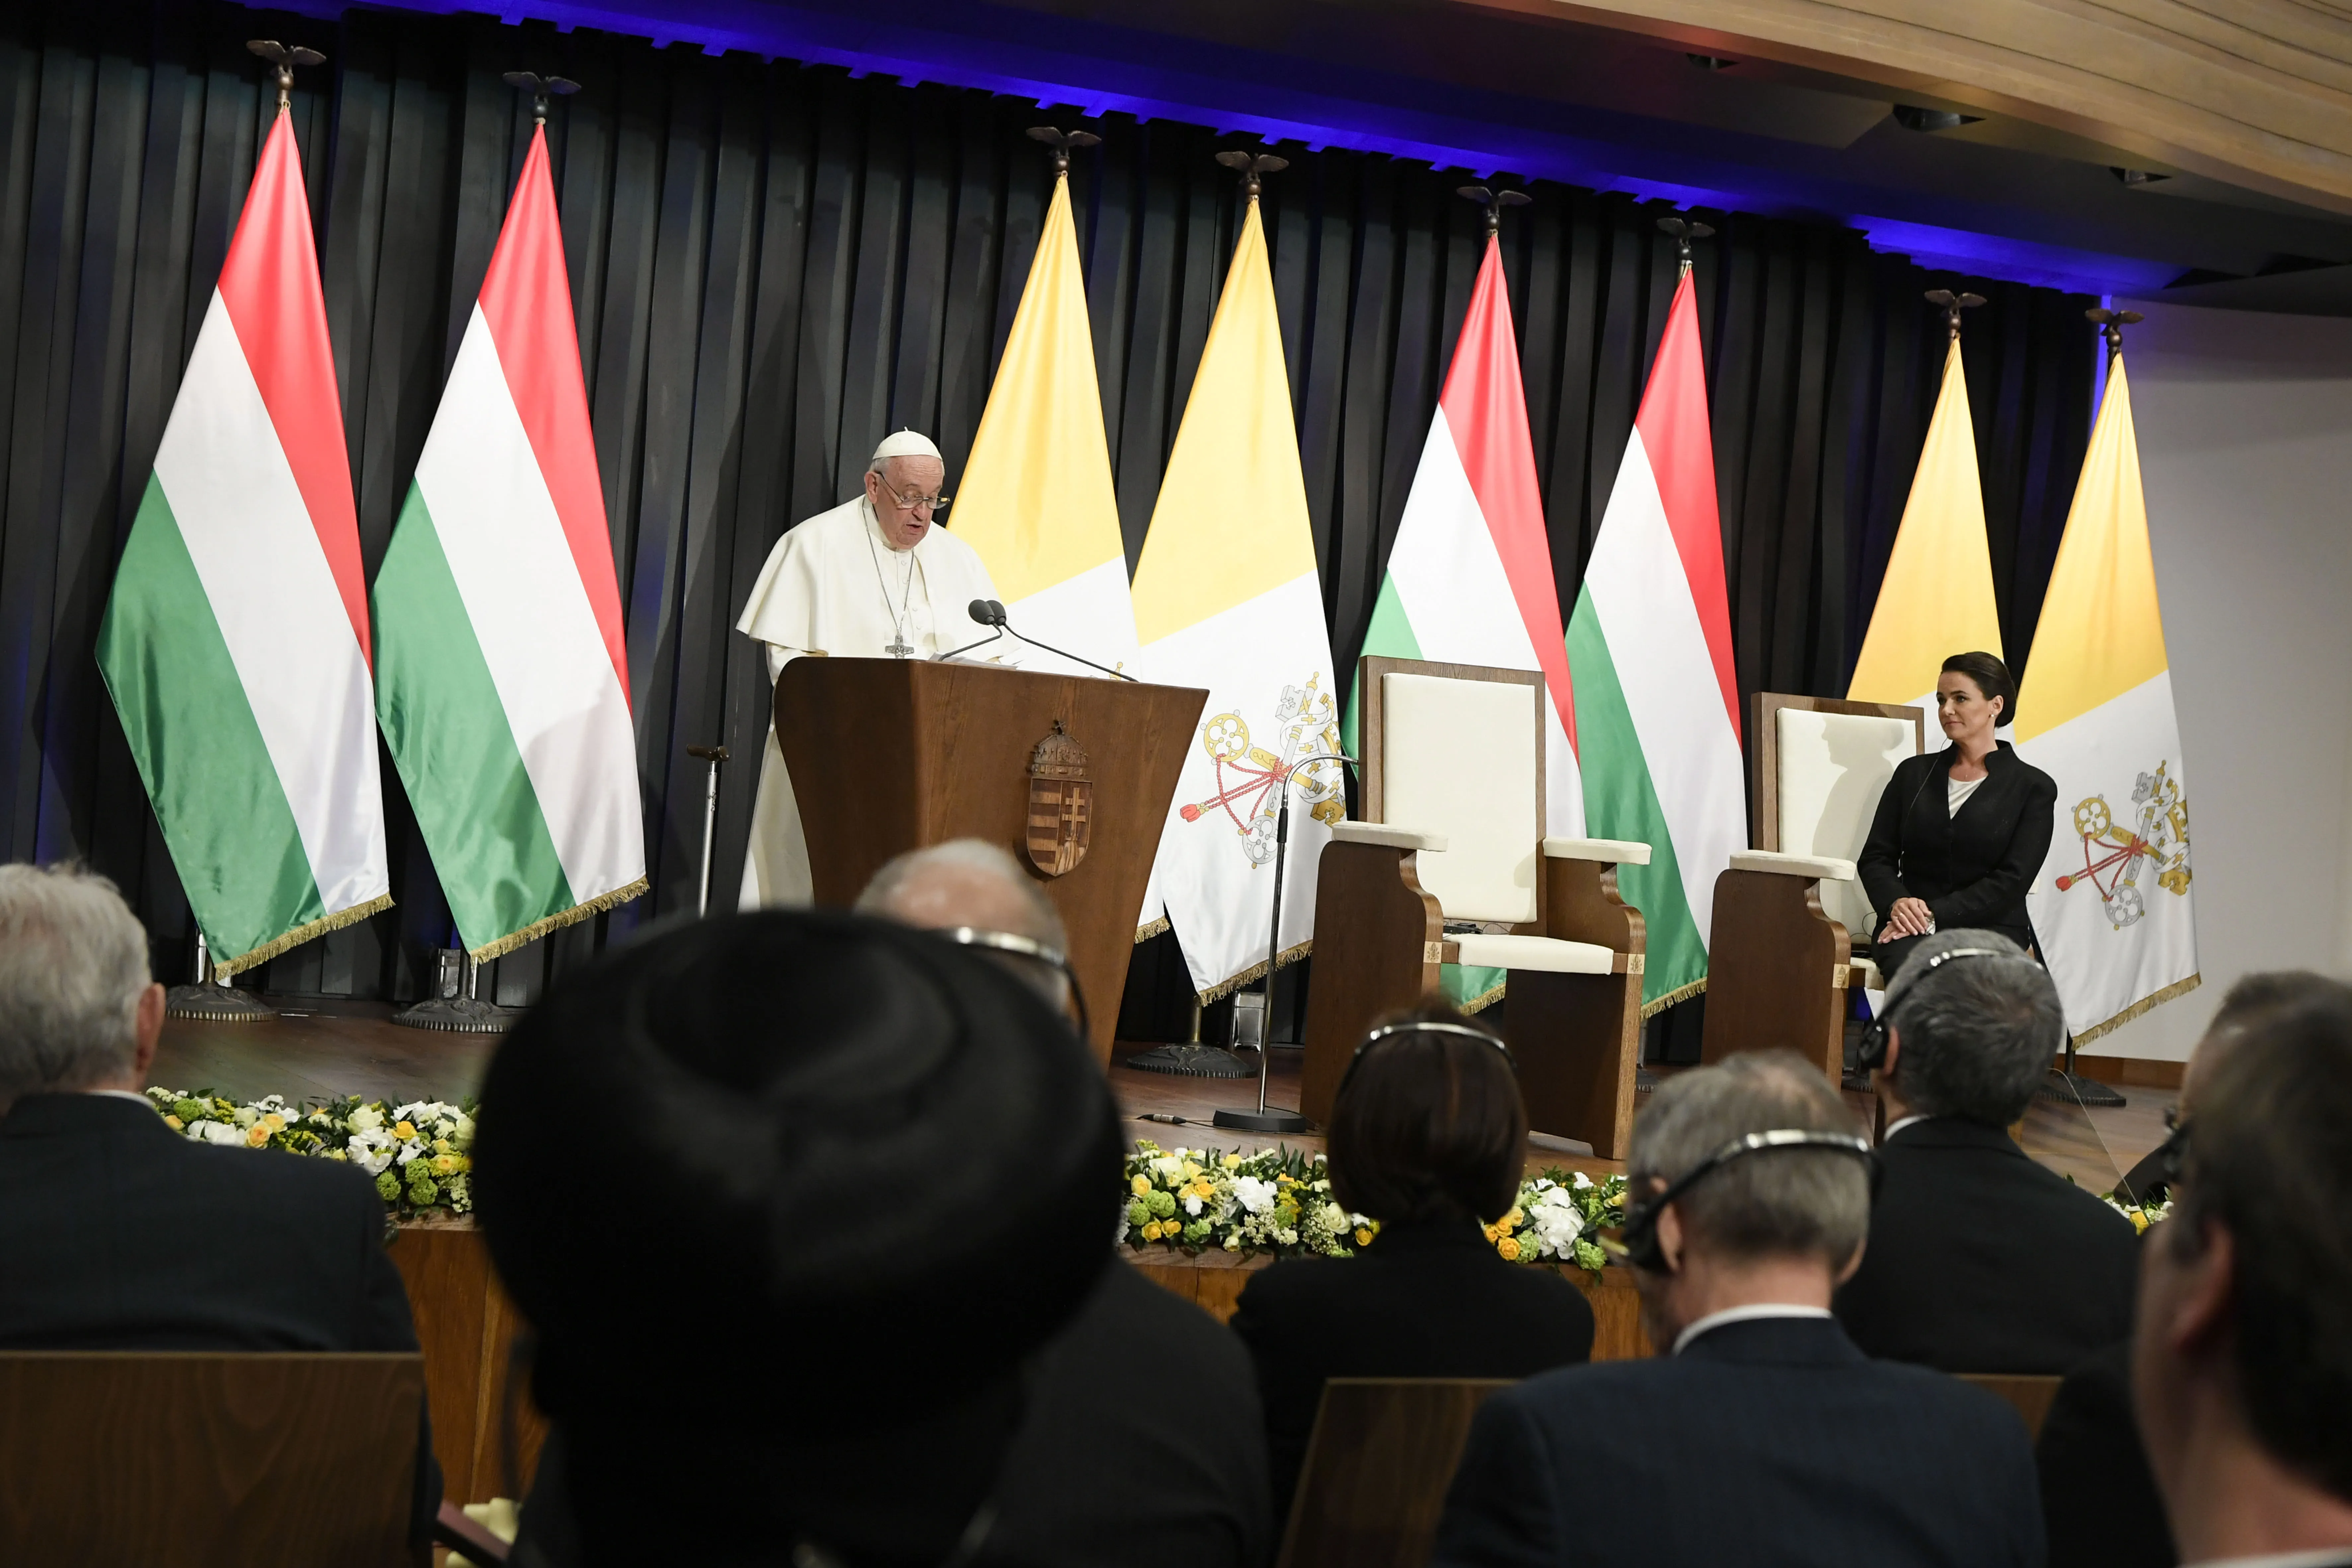 Pope Francis addresses civil authorities and other dignitaries at a former a Carmelite monastery in Budapest, Hungary, on April 28, 2023, on the first day of his three-day pilgrimage to the country.?w=200&h=150